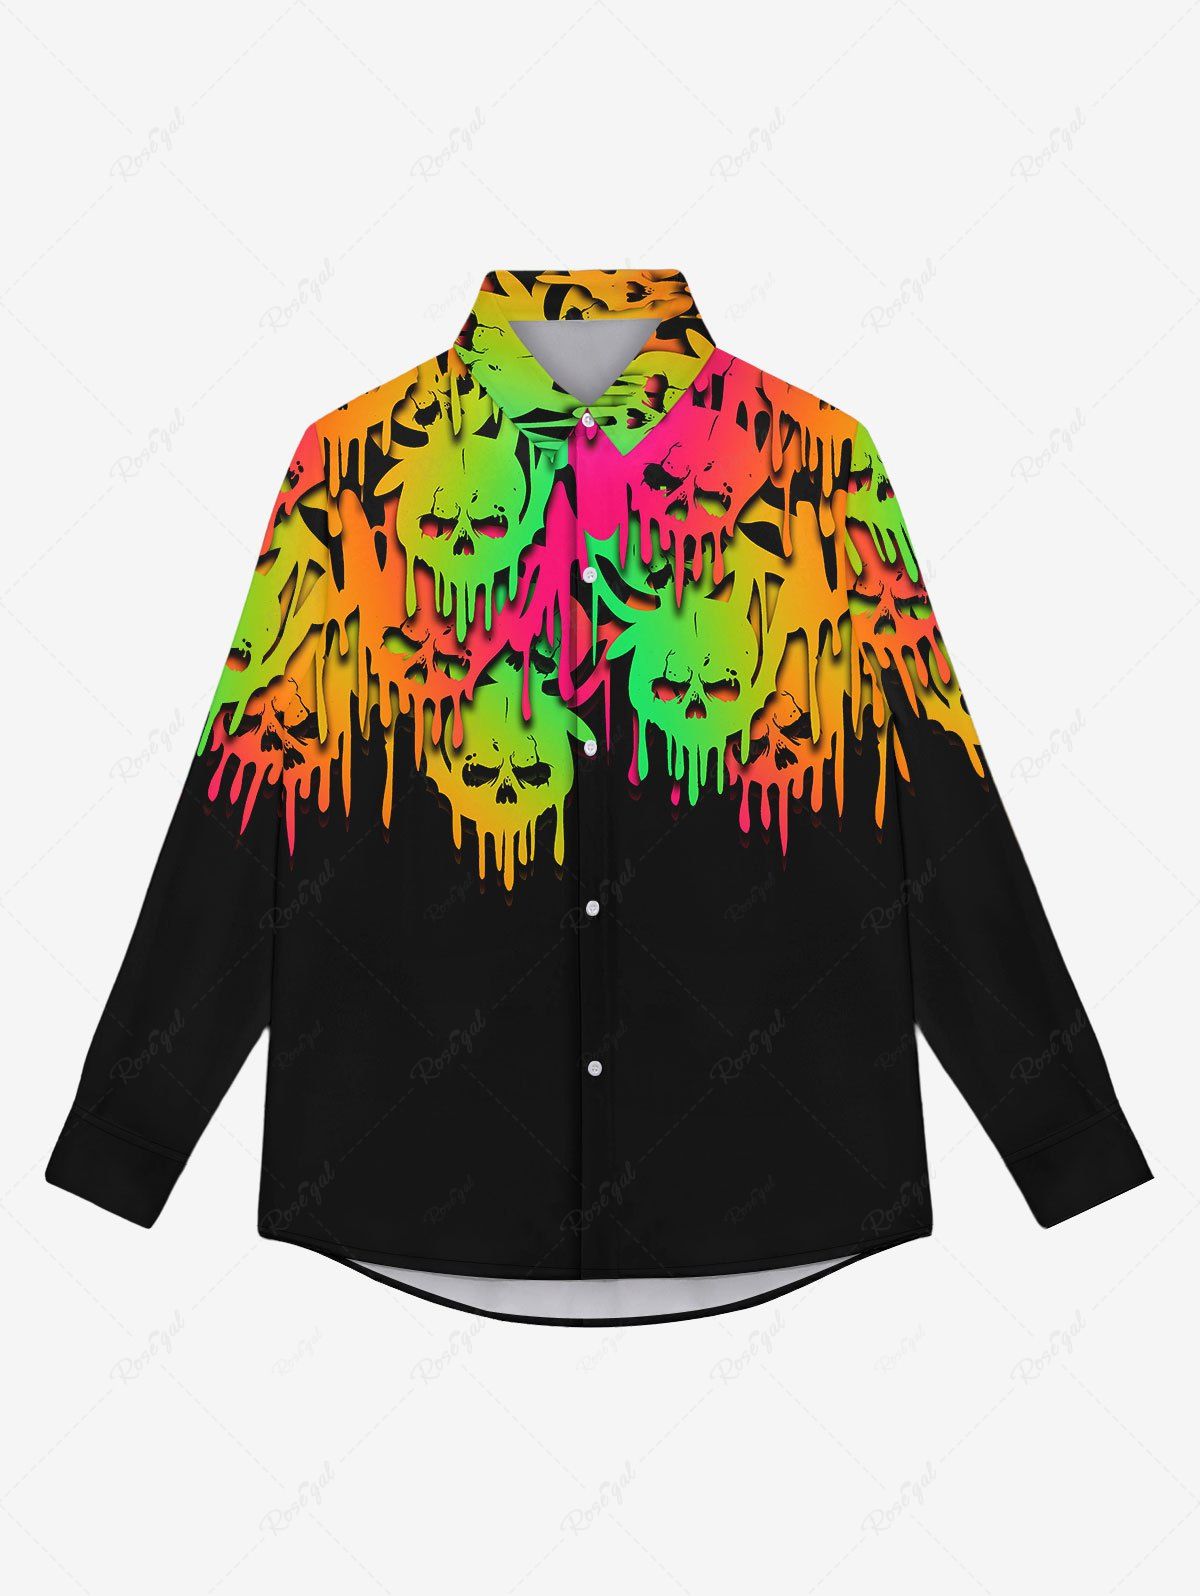 Trendy Gothic Turn-down Collar Ombre Paint Drop Skulls Print Full Buttons Shirt For Men  